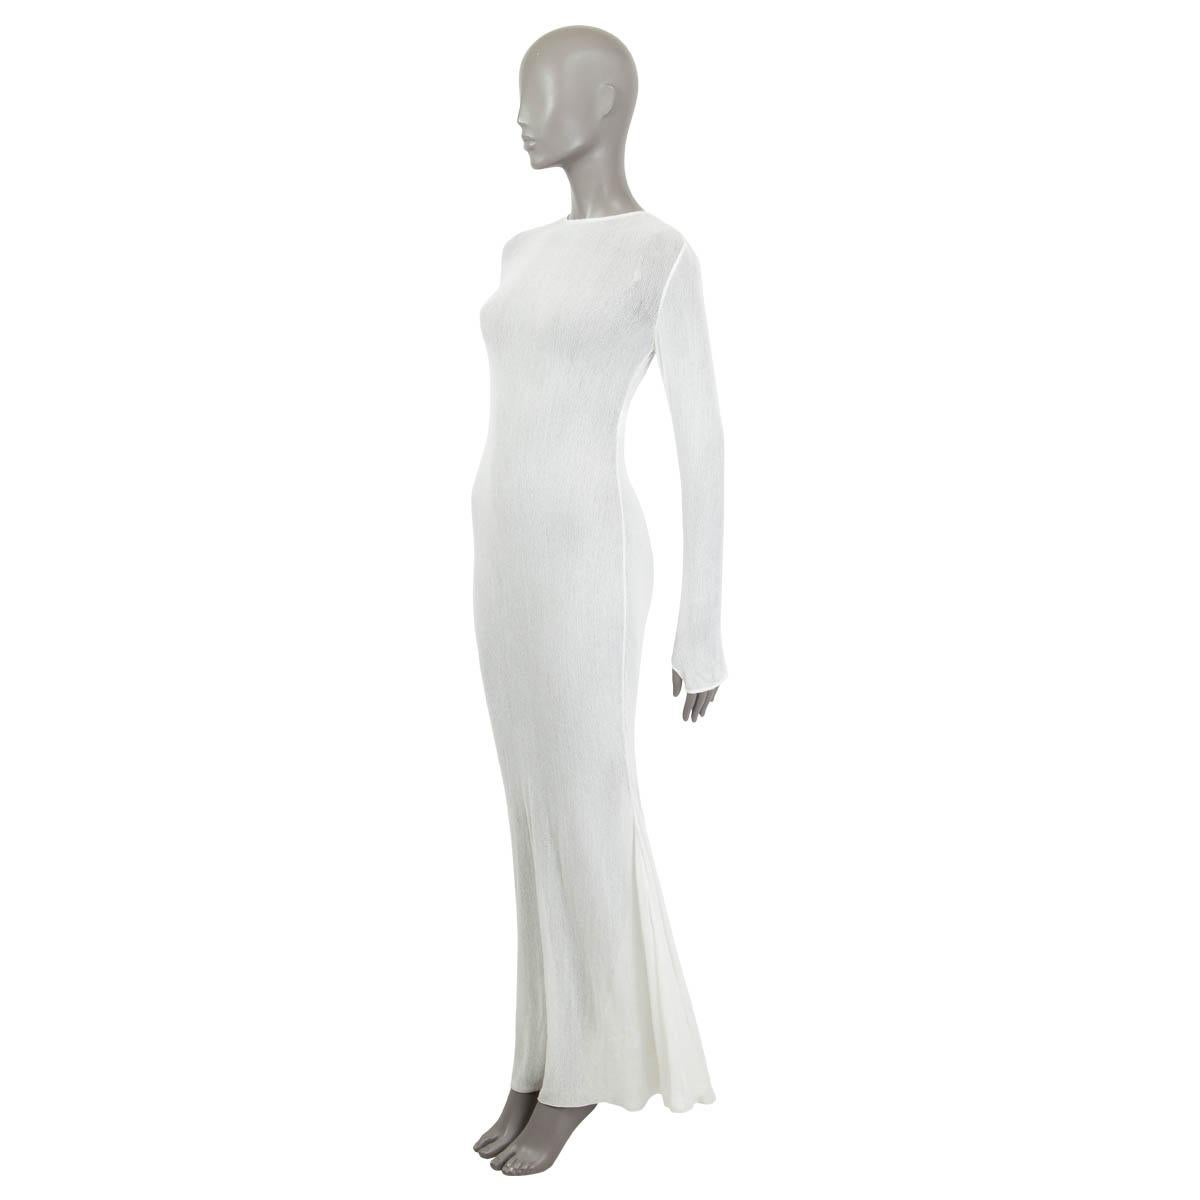 100% authentic Chanel semi sheer maxi dress in off-white cotton (100%). Features long sleeves and thumb holes at the cuffs. Opens with a hook and a concealed zipper at the back. Unlined. Shows some faint stains of wearing at the hemline, otherwise